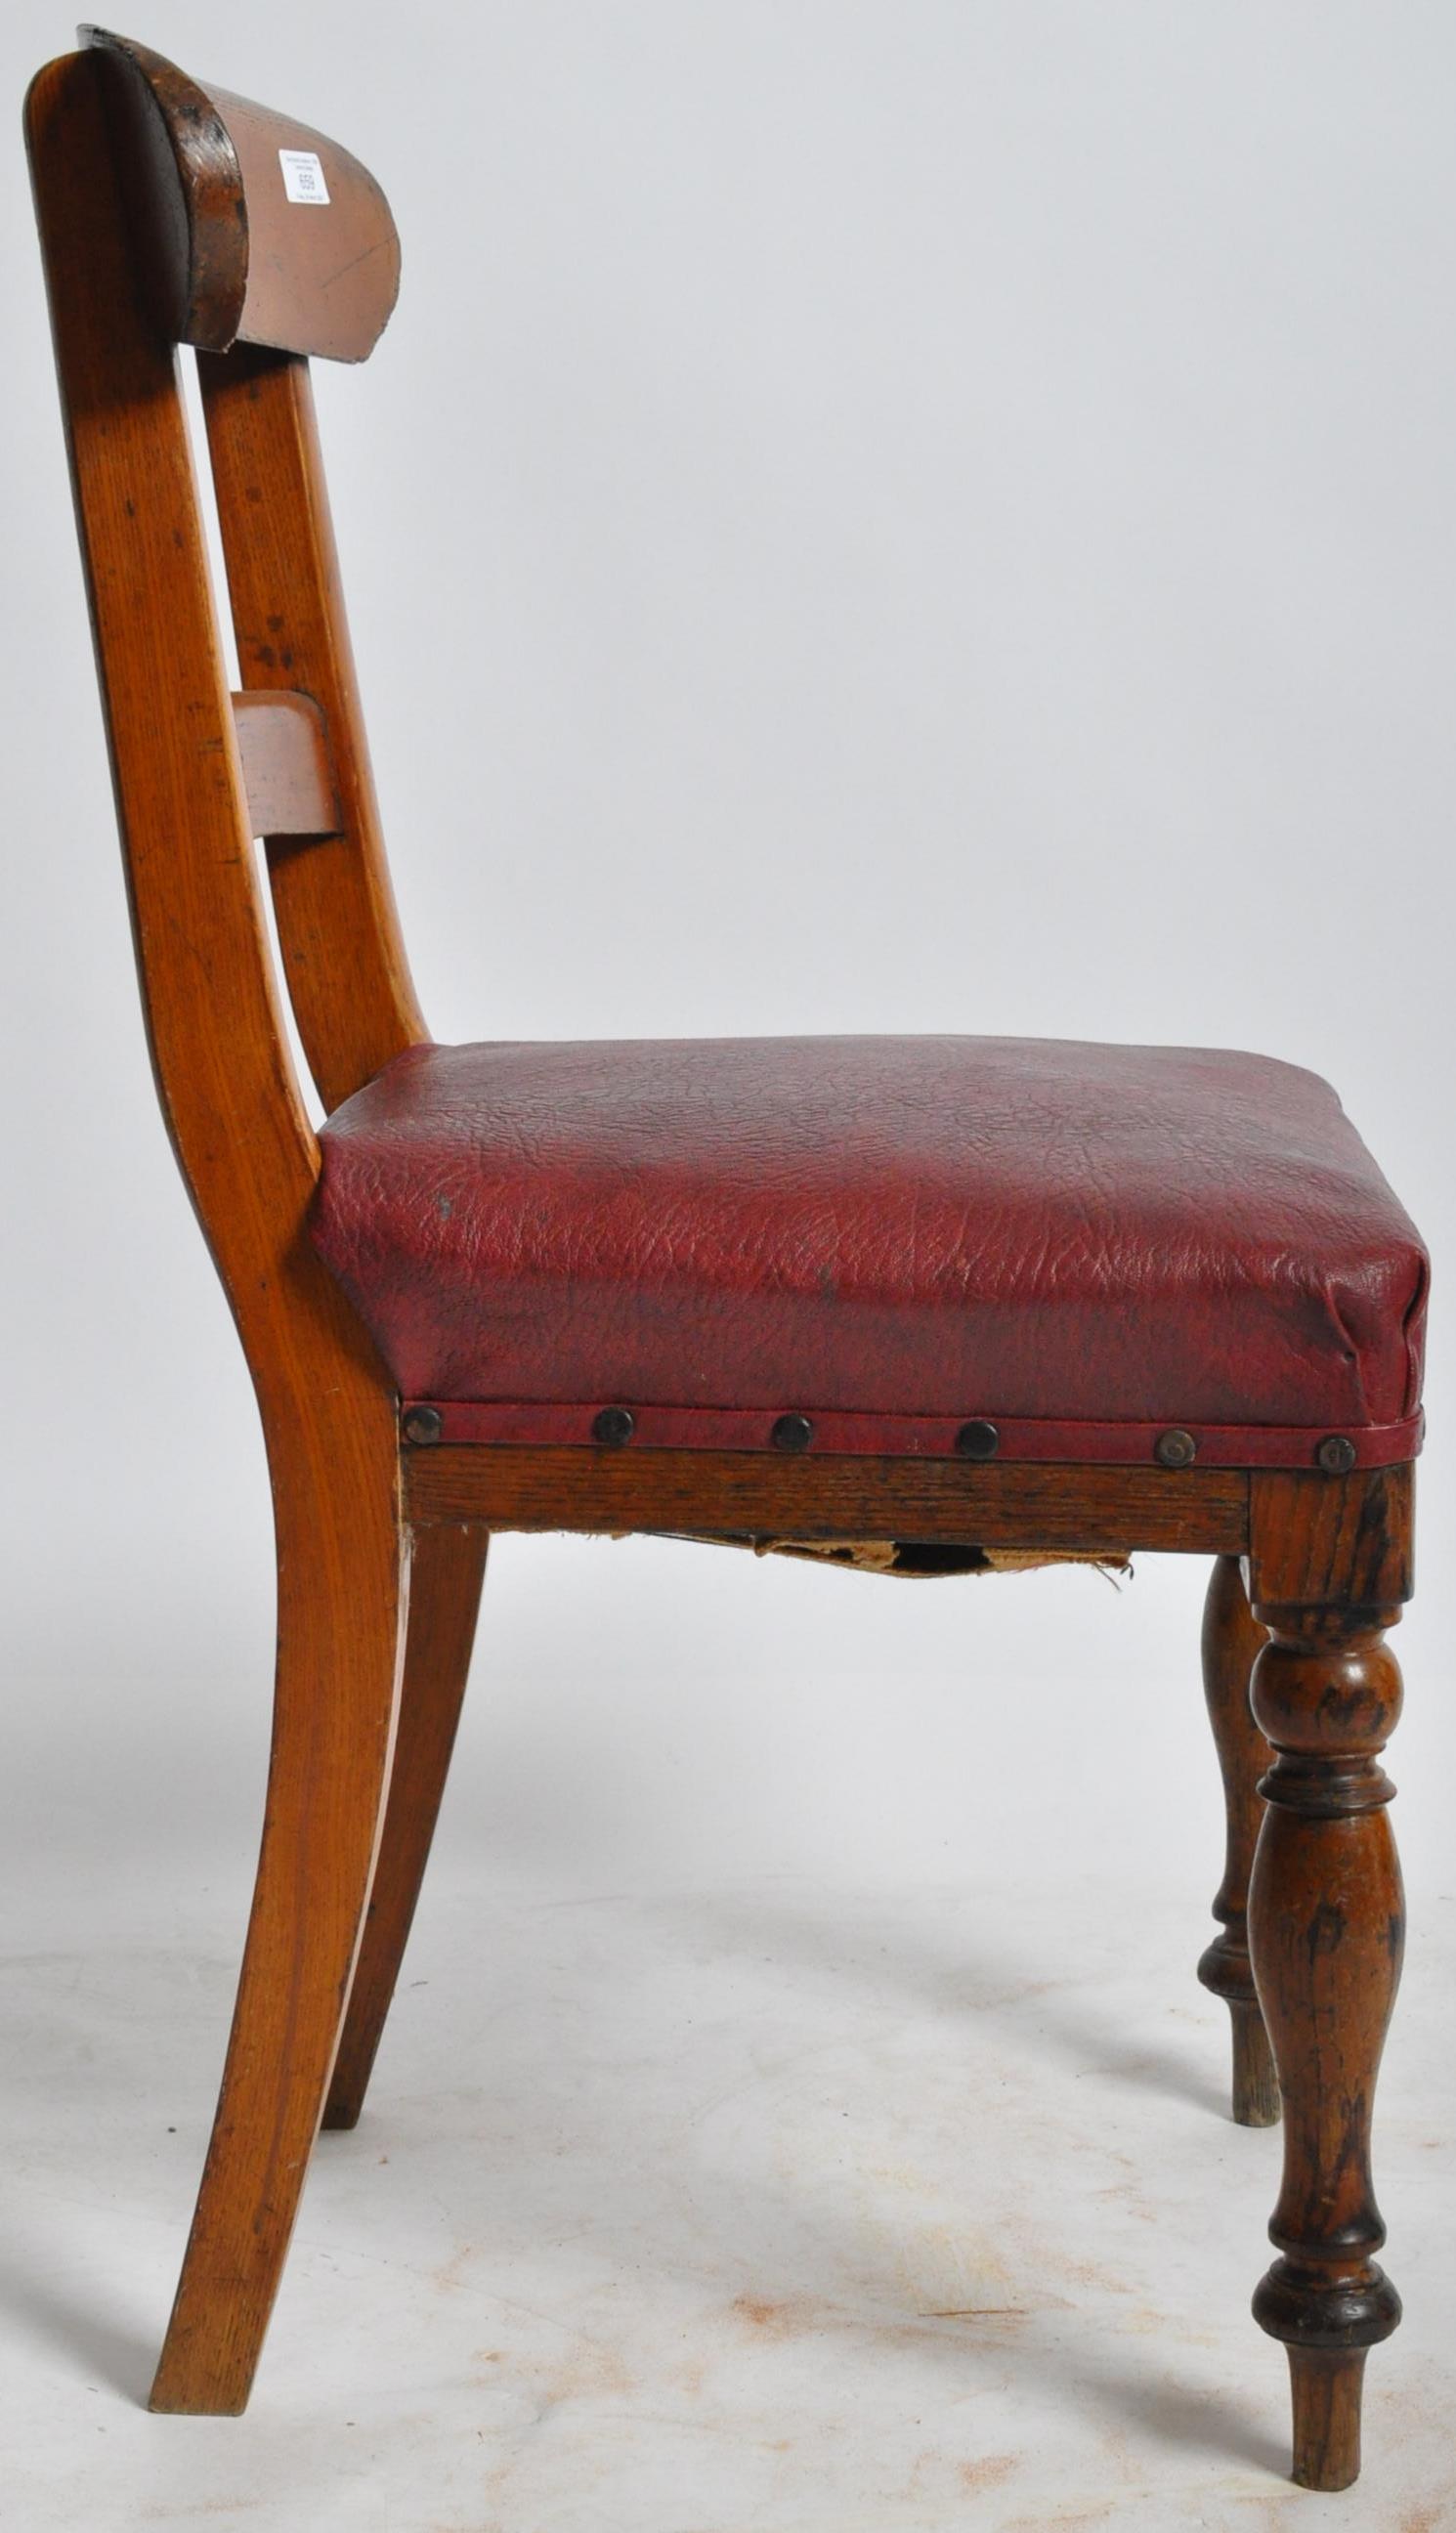 VINTAGE EARLY 20TH CENTURY OAK RAILWAY STATION CHAIR - BRISTOL - Image 4 of 9